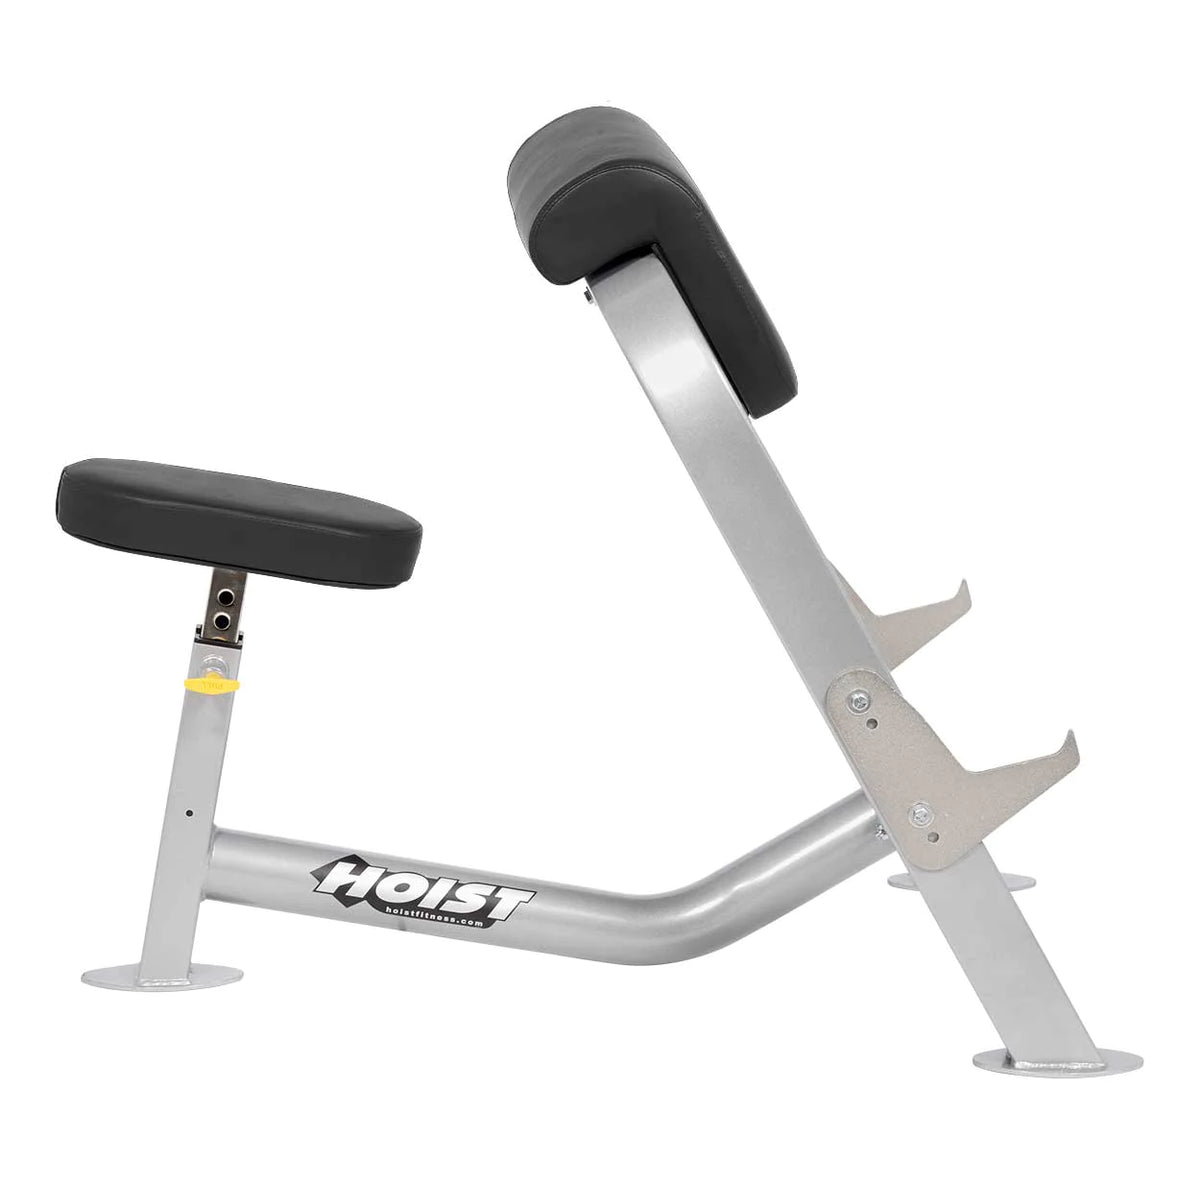 Hoist Fitness HF-4550 Preacher Curl Bench side view | Fitness Experience